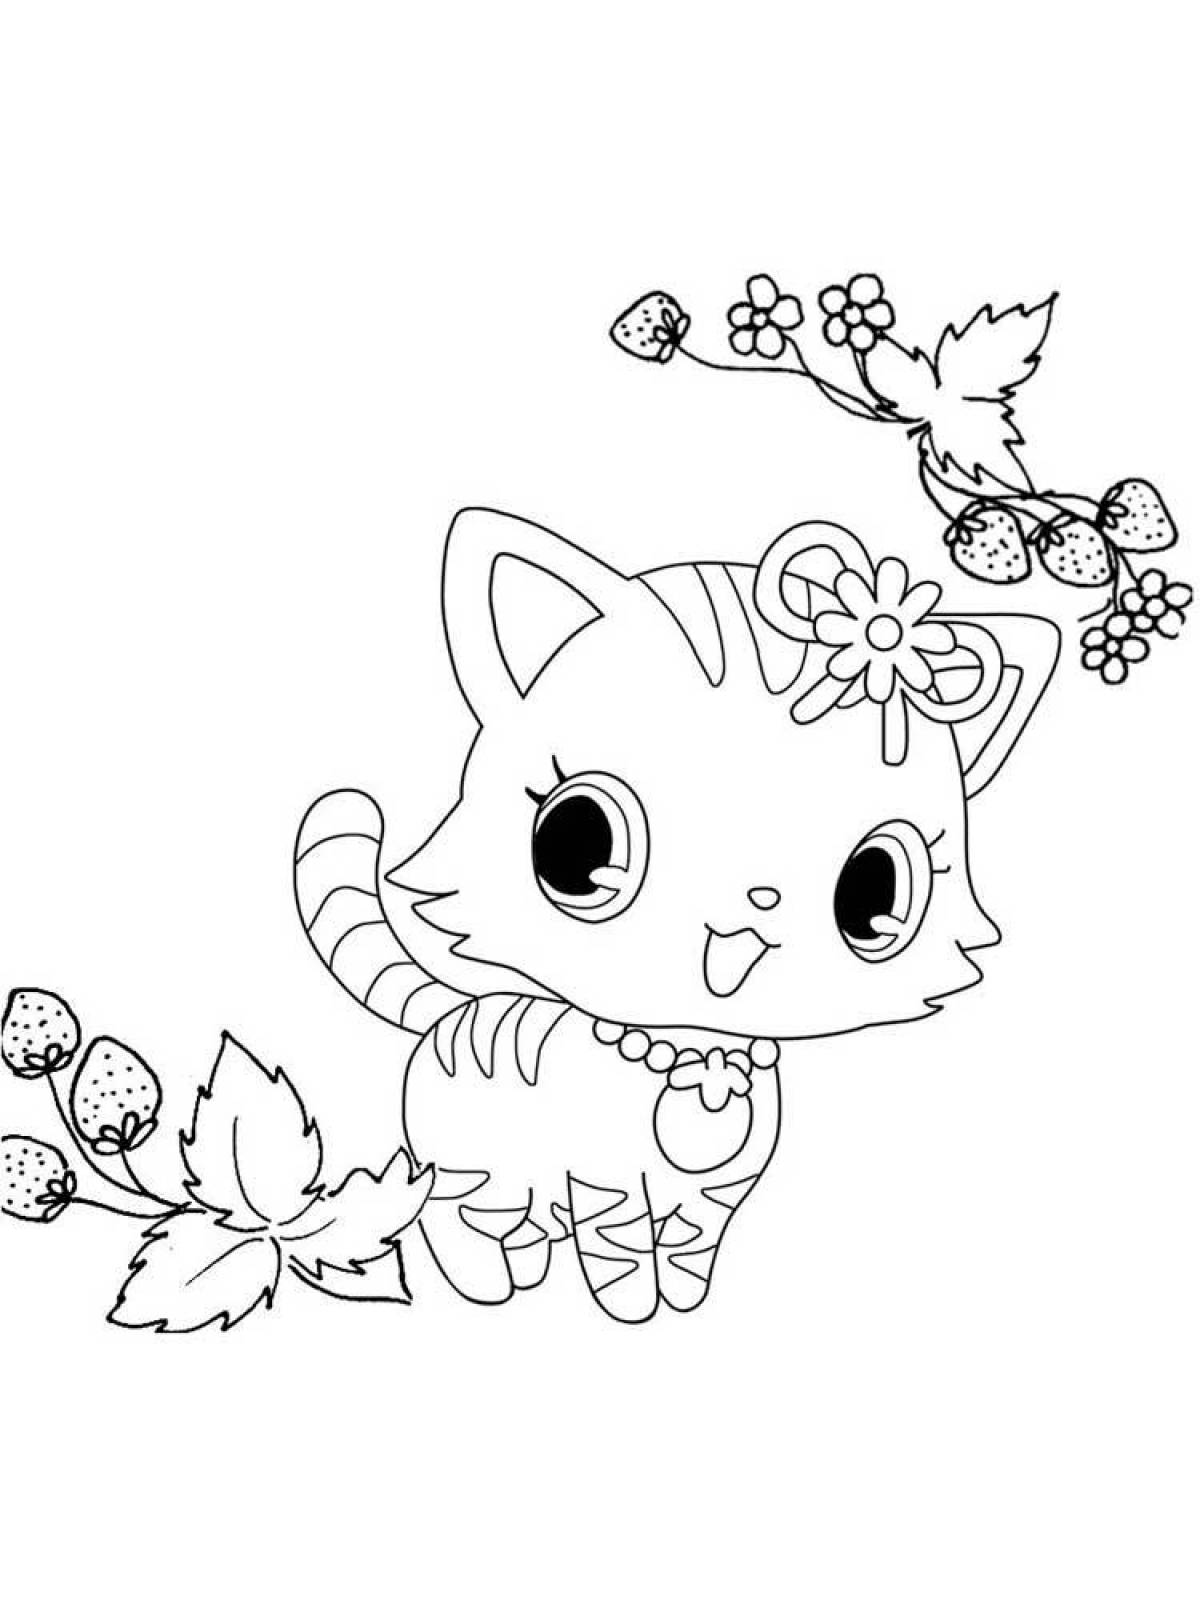 Sky coloring for girls cute animals